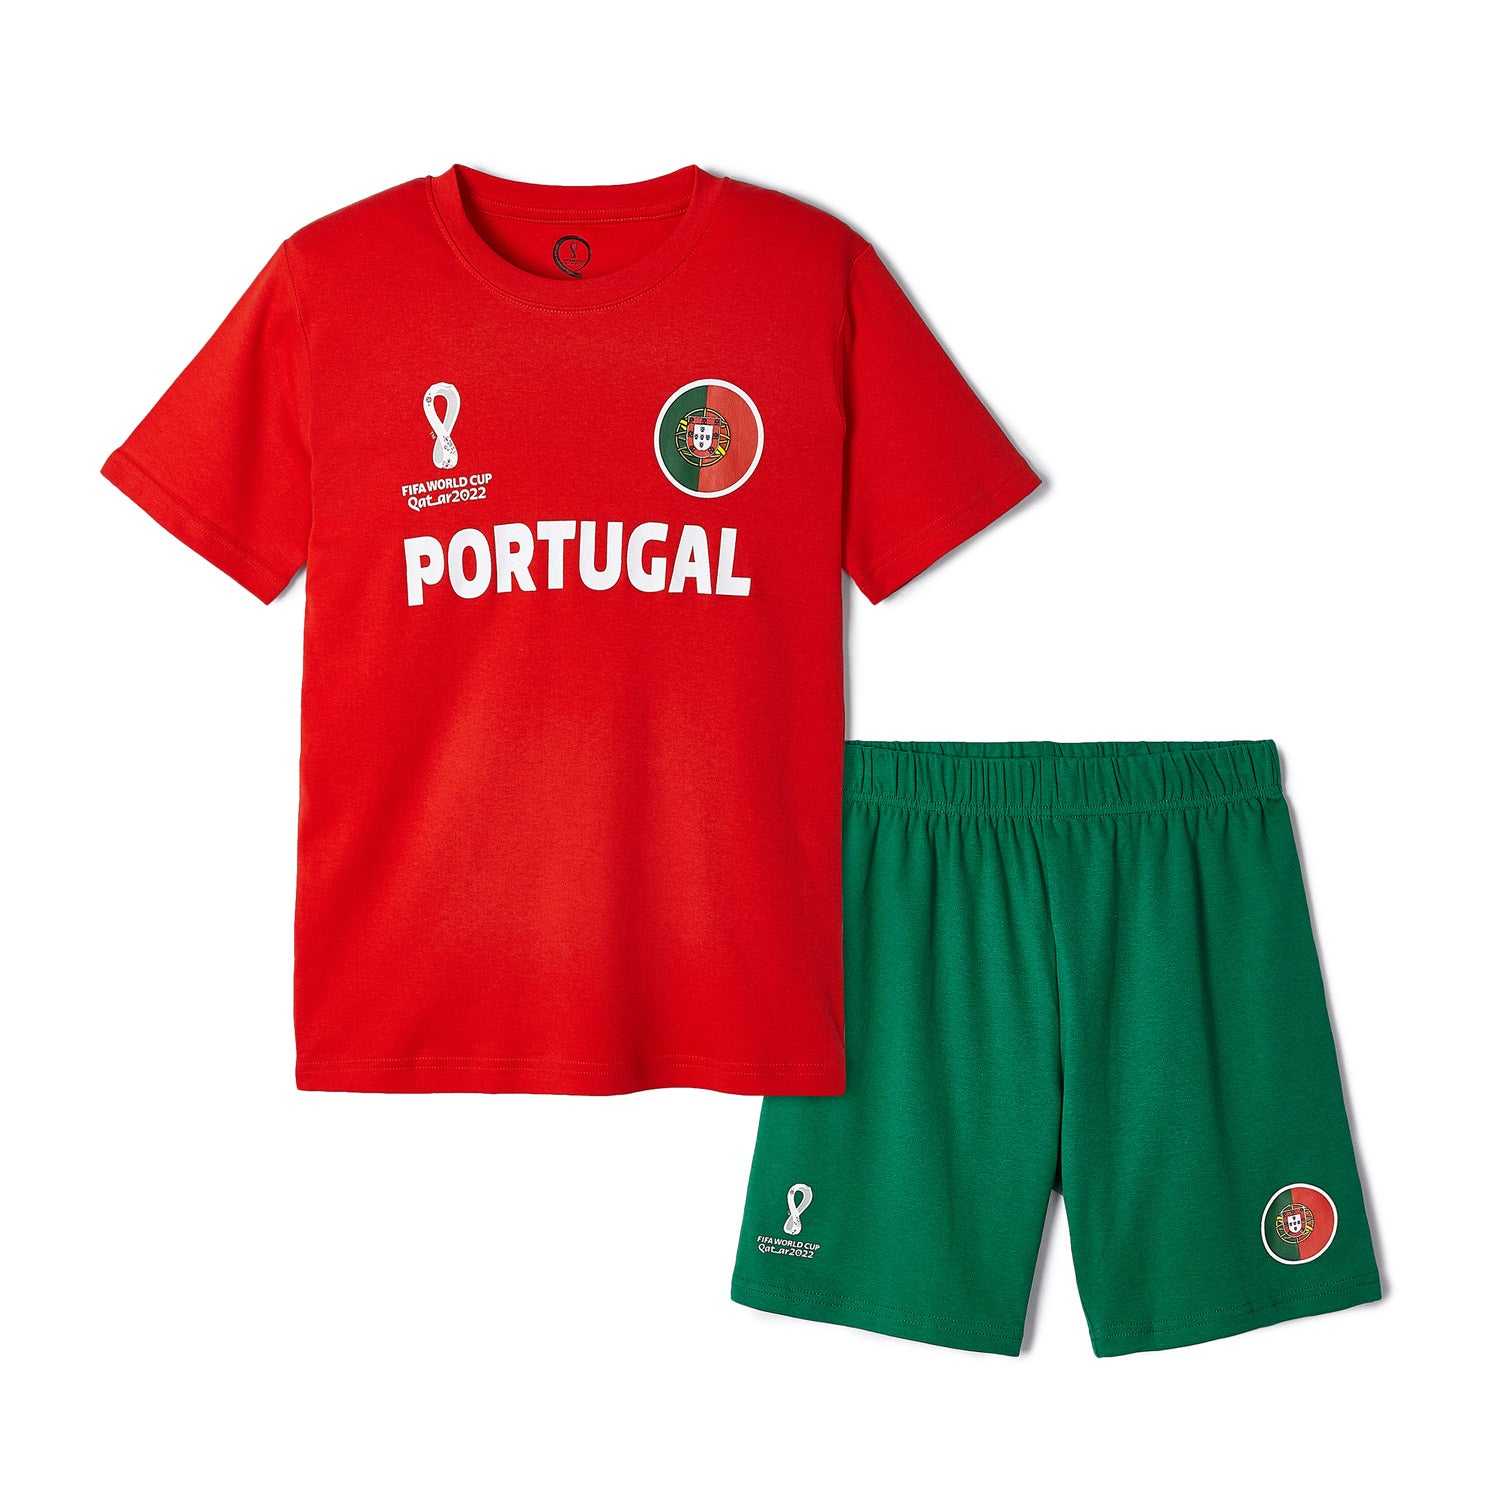 2022 World Cup Portugal Red T-Shirt - Youth